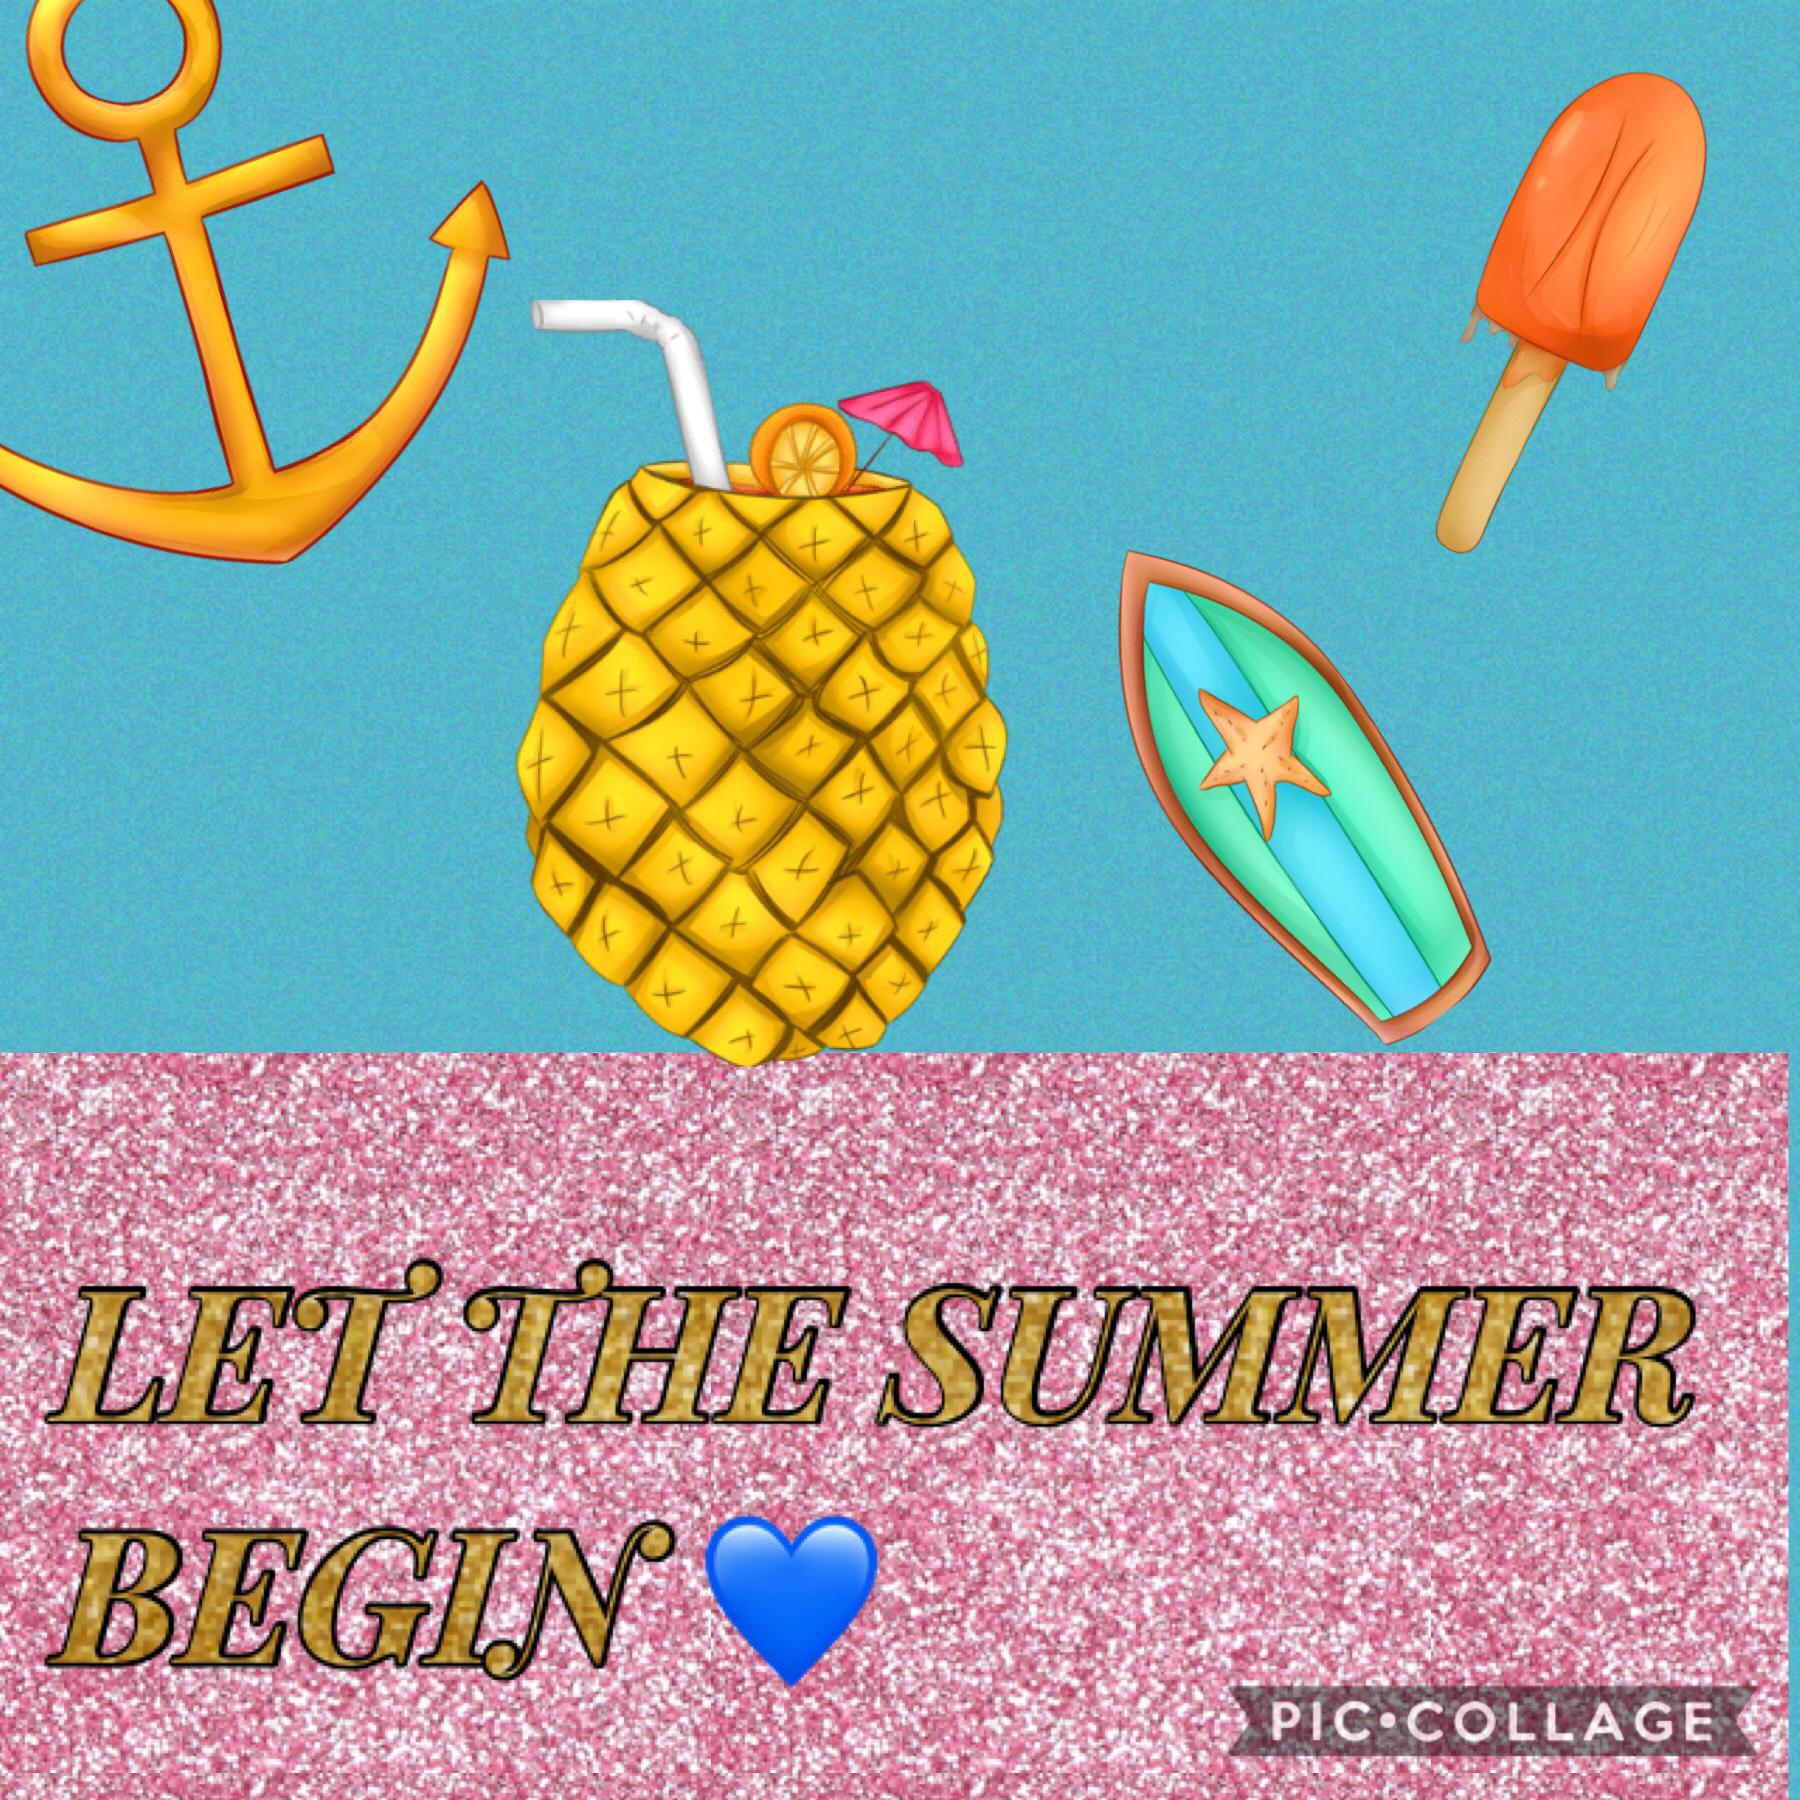 Let the summer begin 

This is my first account and I only have one follower so will you please follow me 